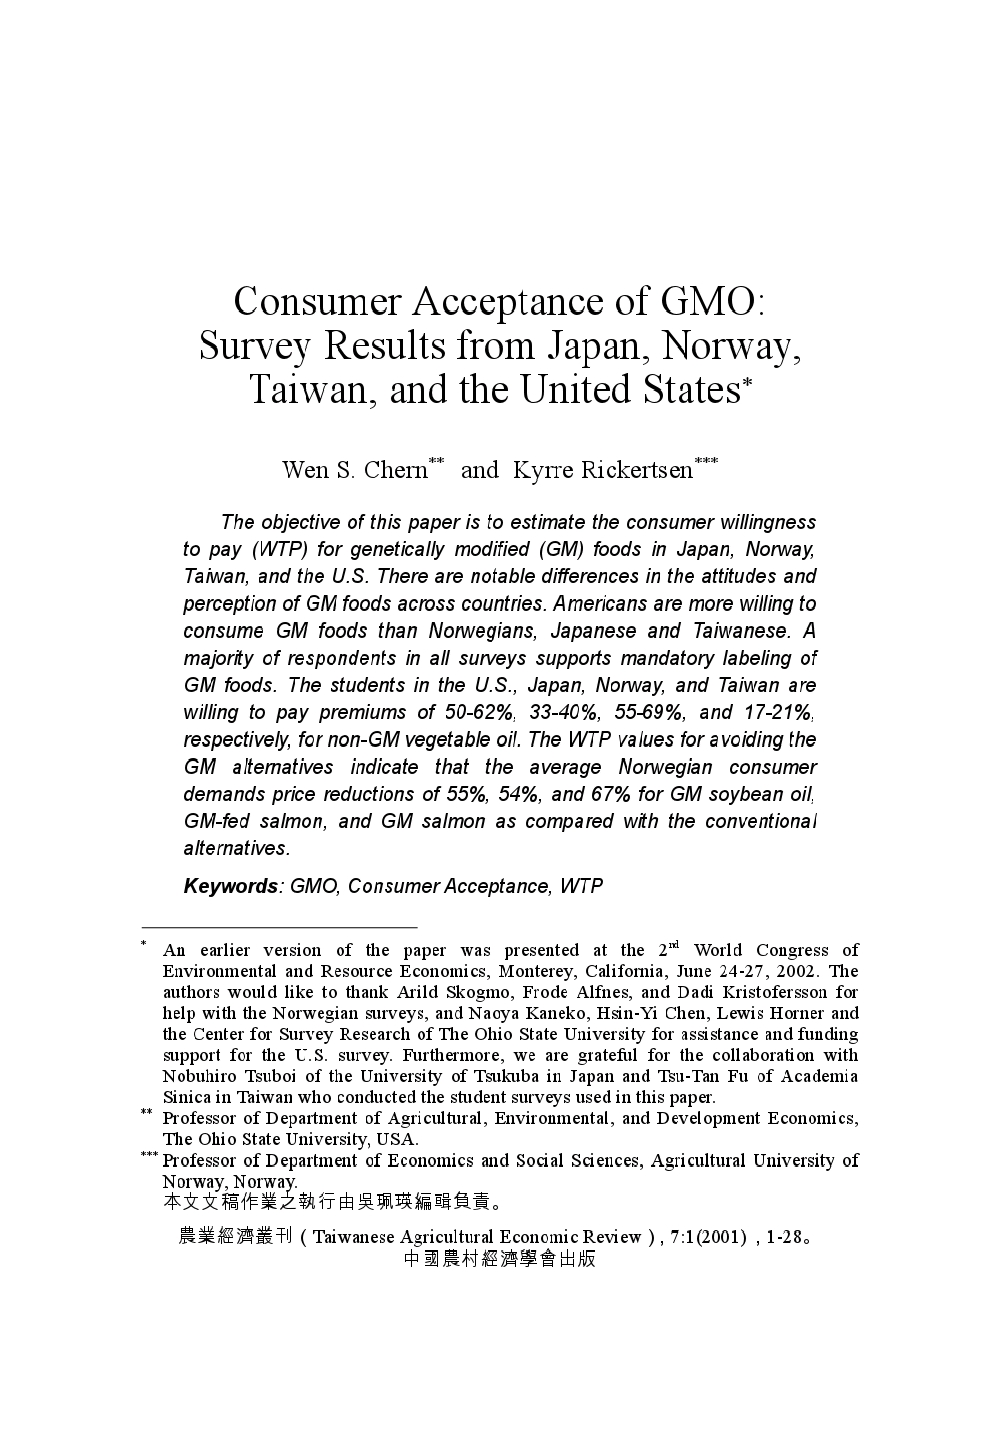 Consumer_Acceptance_of_GMO-Survey_Results_from_Japan__Norway__Taiwan__and_the_United_States.jpg